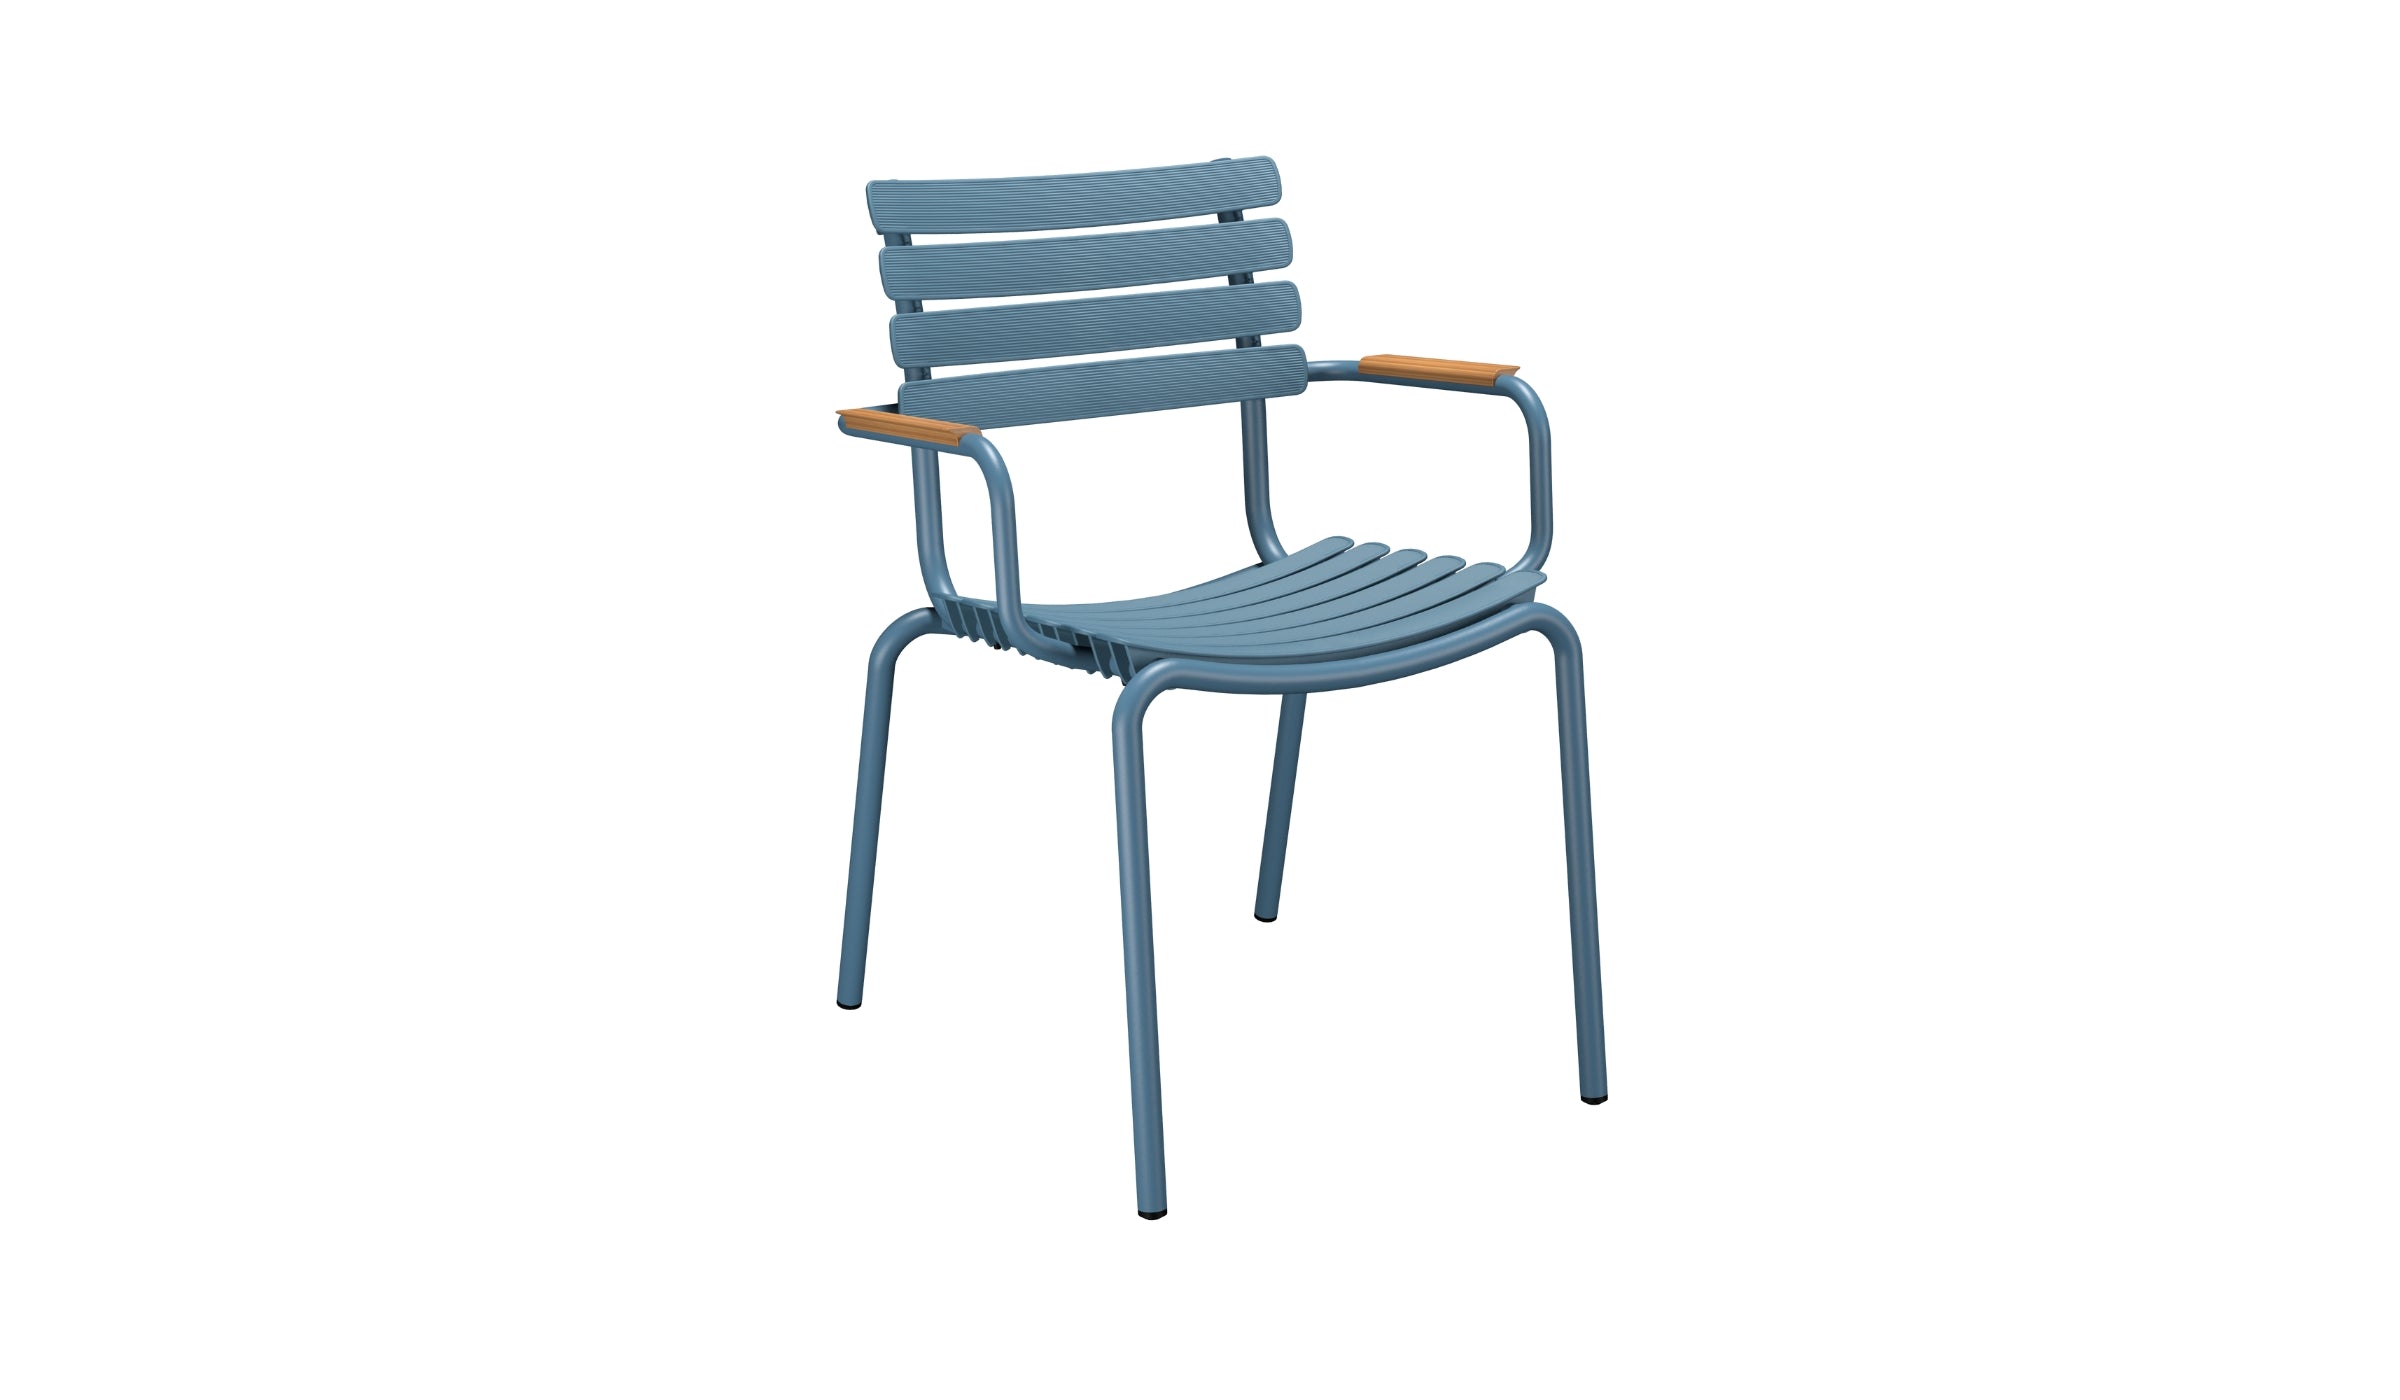 Reclips - Outdoor chair in aluminum and recycled plastic with bamboo armrests, blue